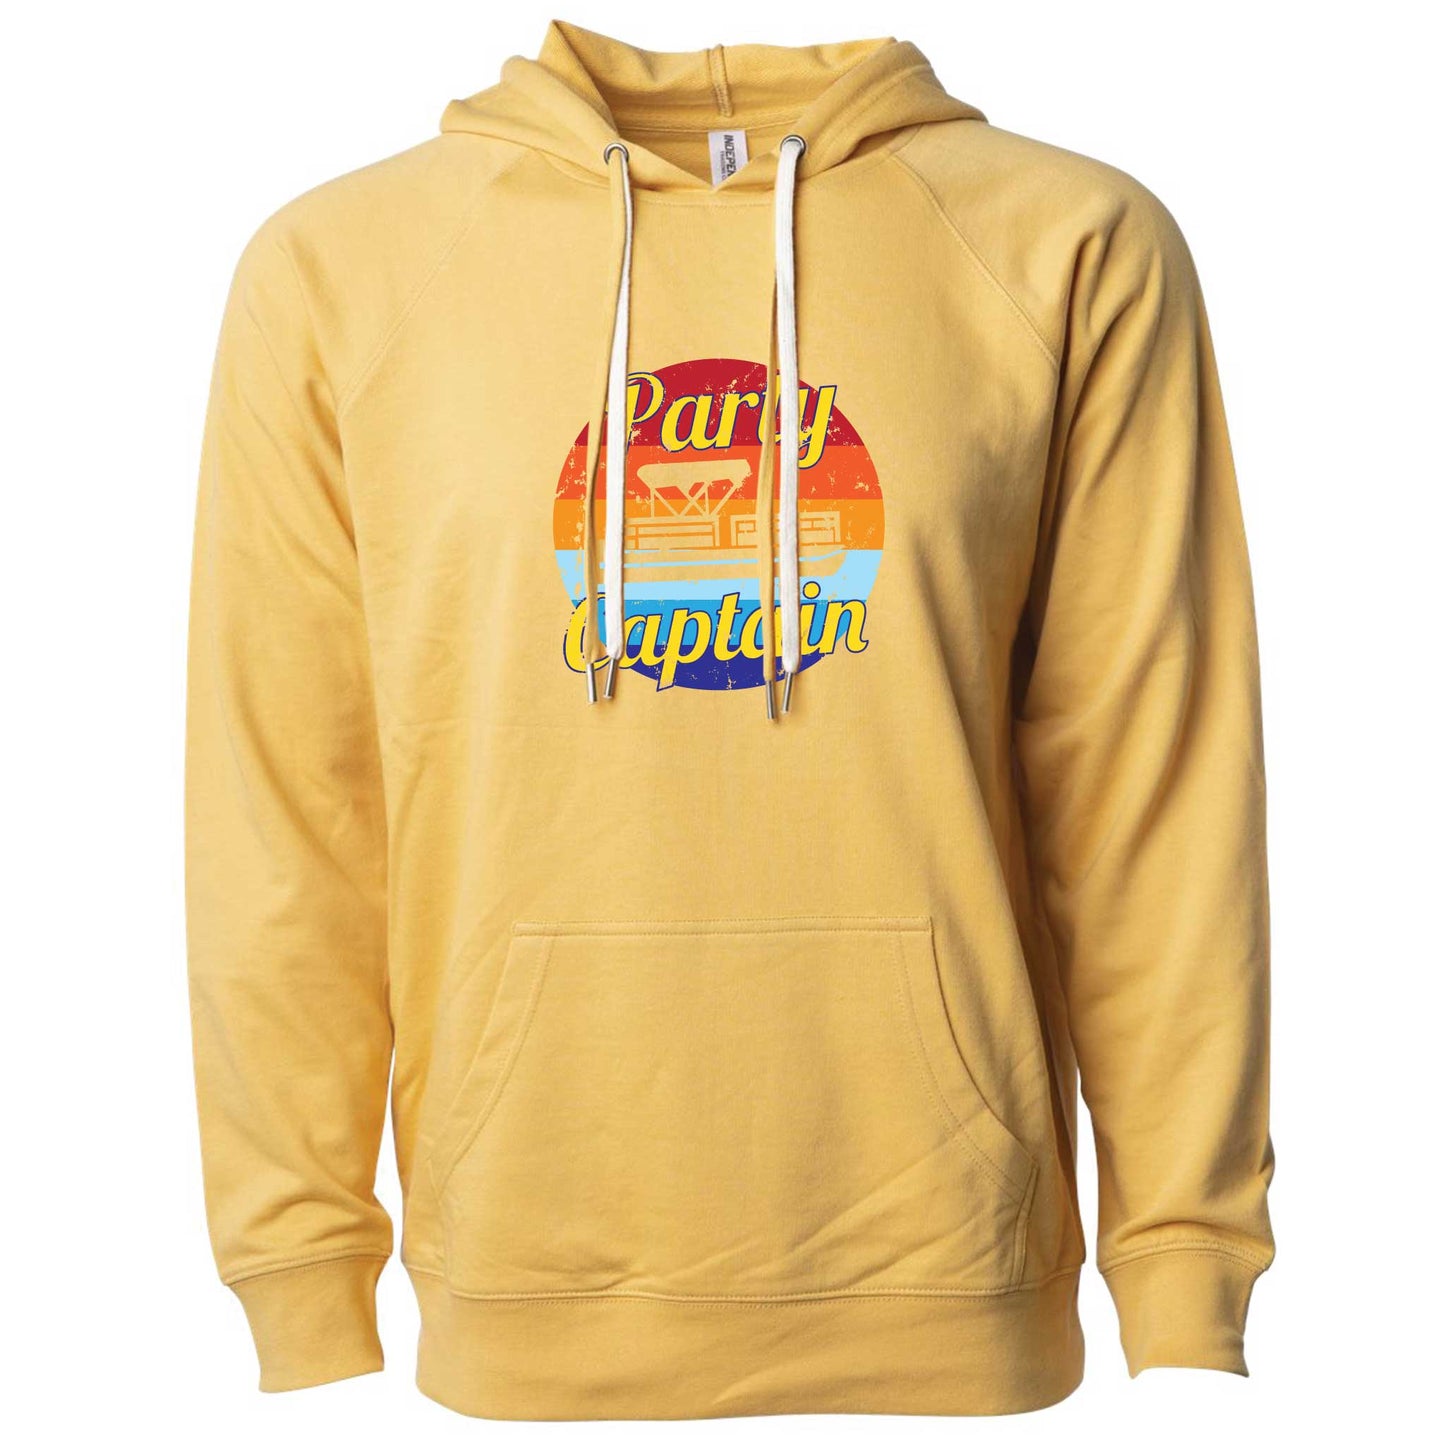 Party Captain Lightweight Hoodie